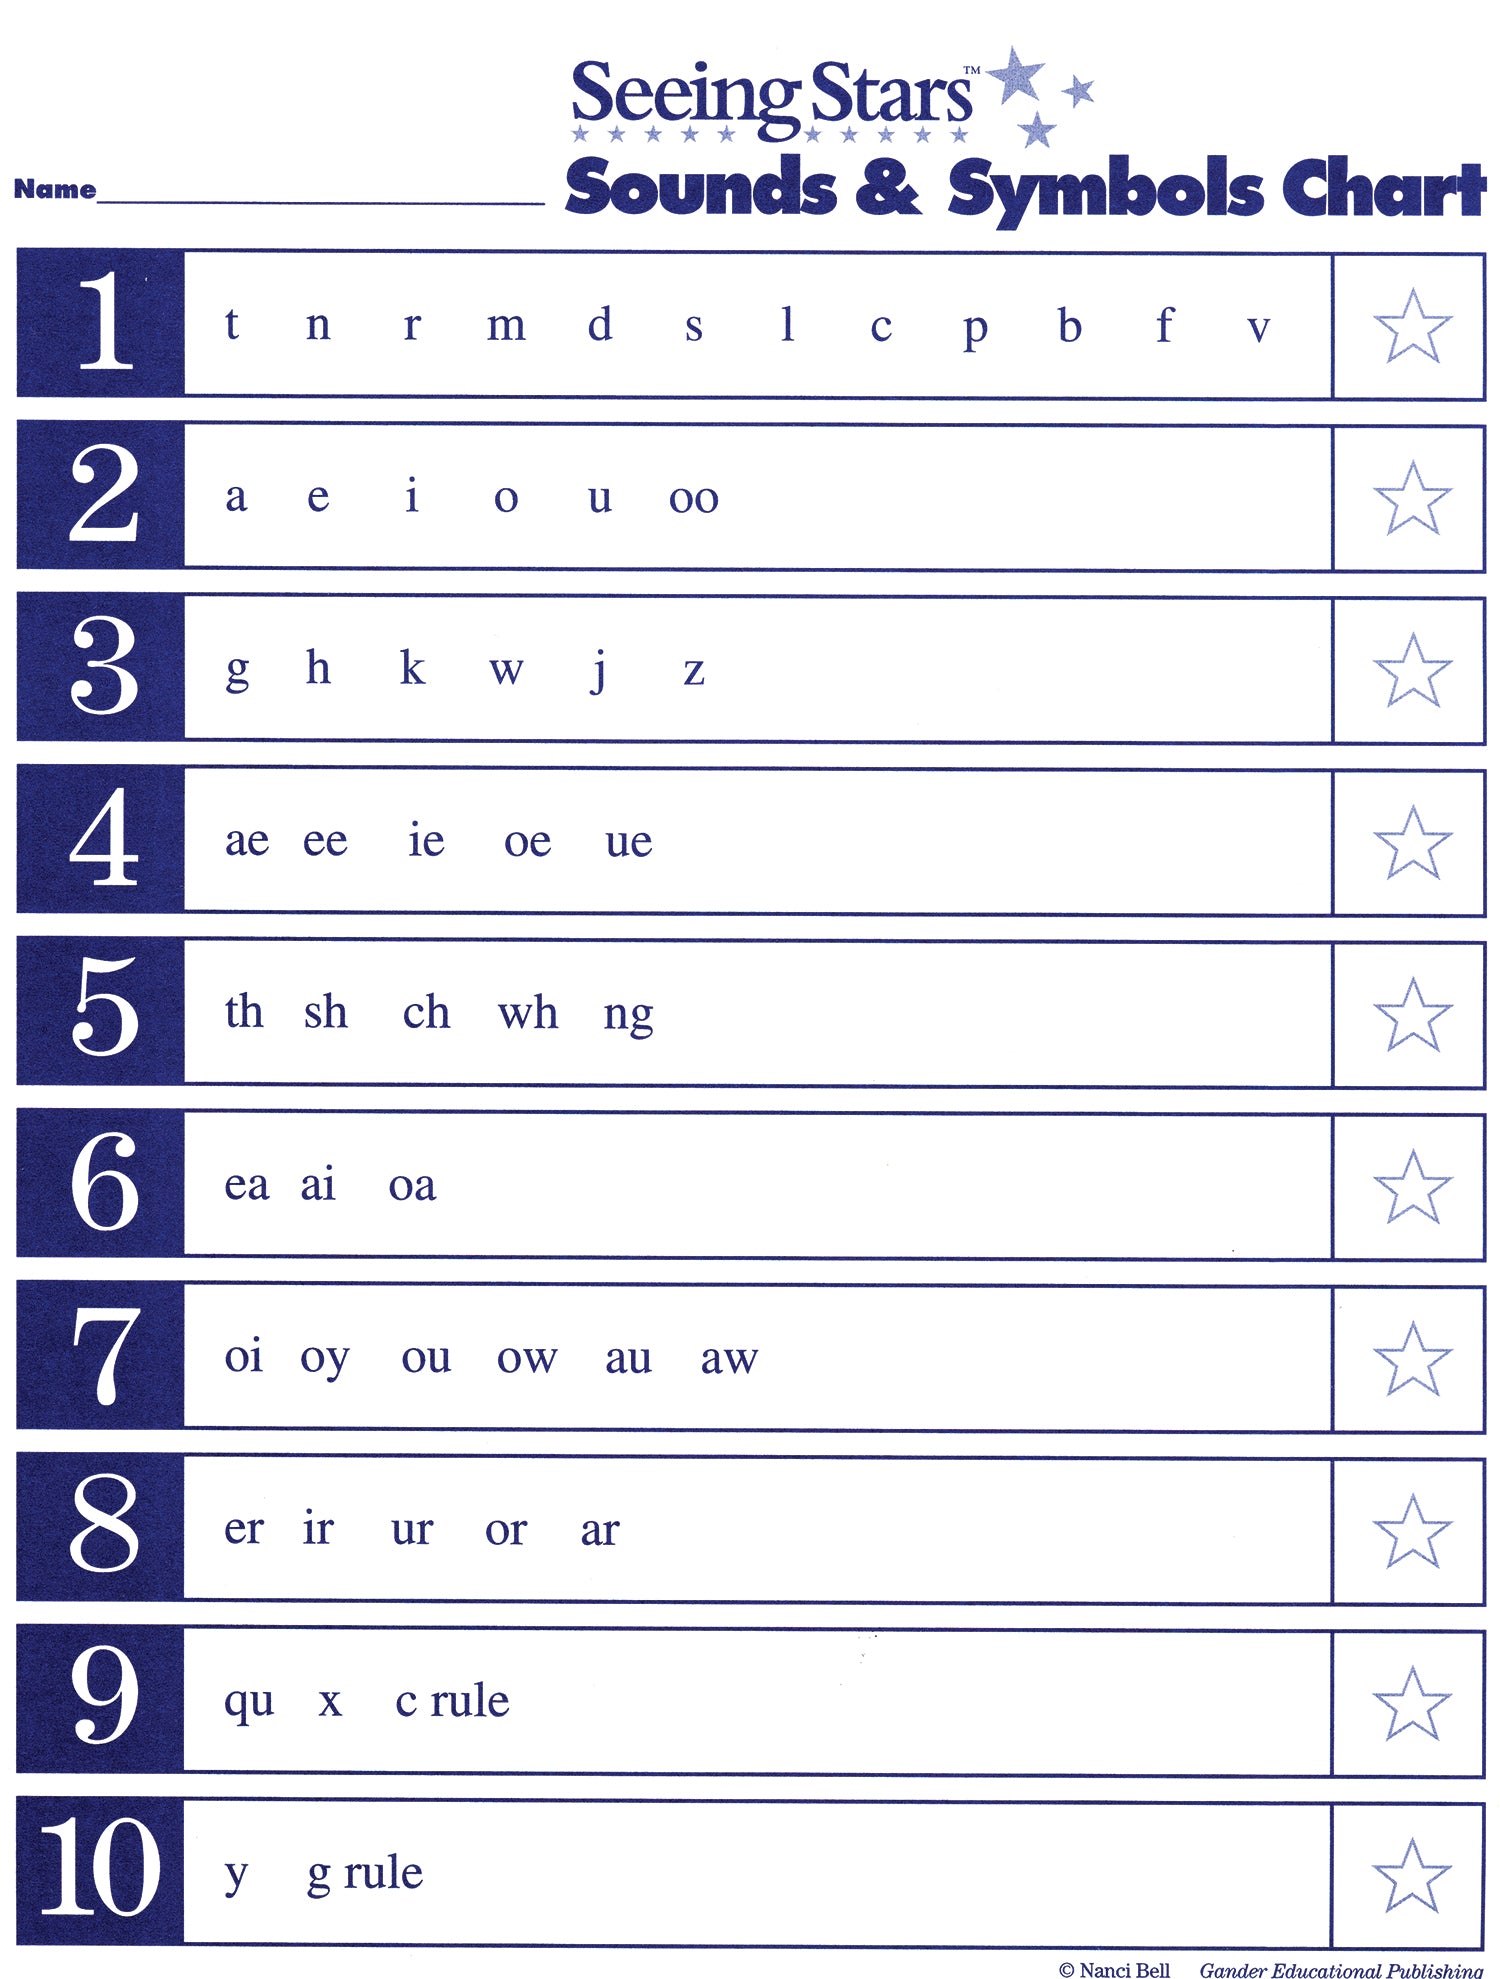 Seeing Stars® Sounds and Symbols Charts